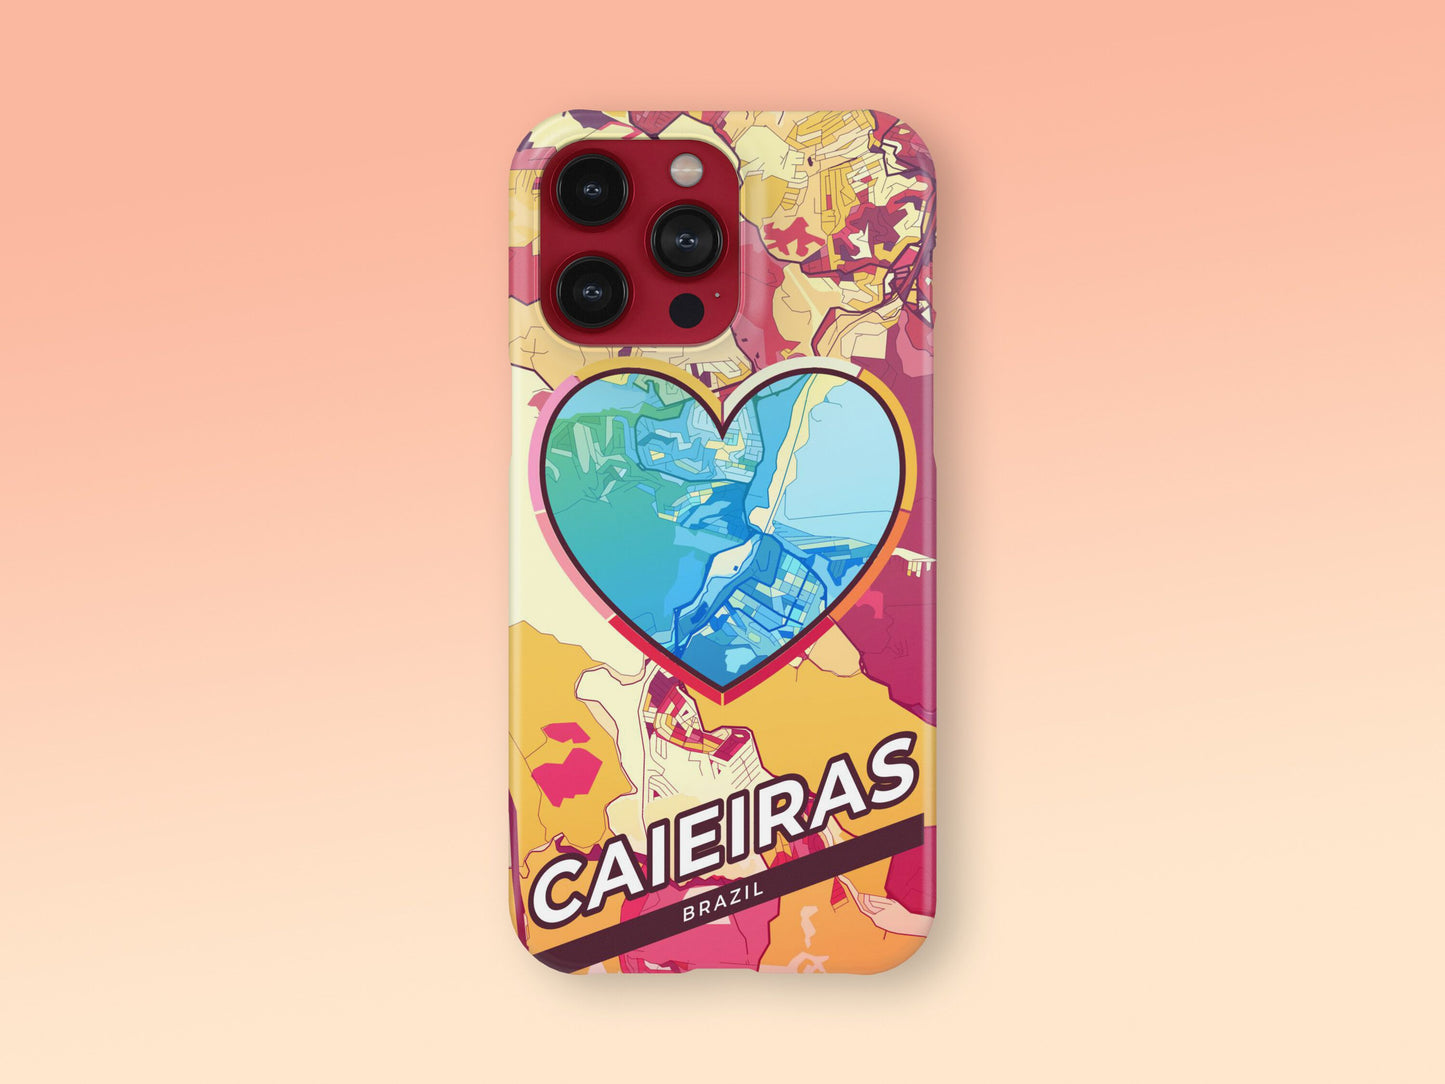 Caieiras Brazil slim phone case with colorful icon. Birthday, wedding or housewarming gift. Couple match cases. 2